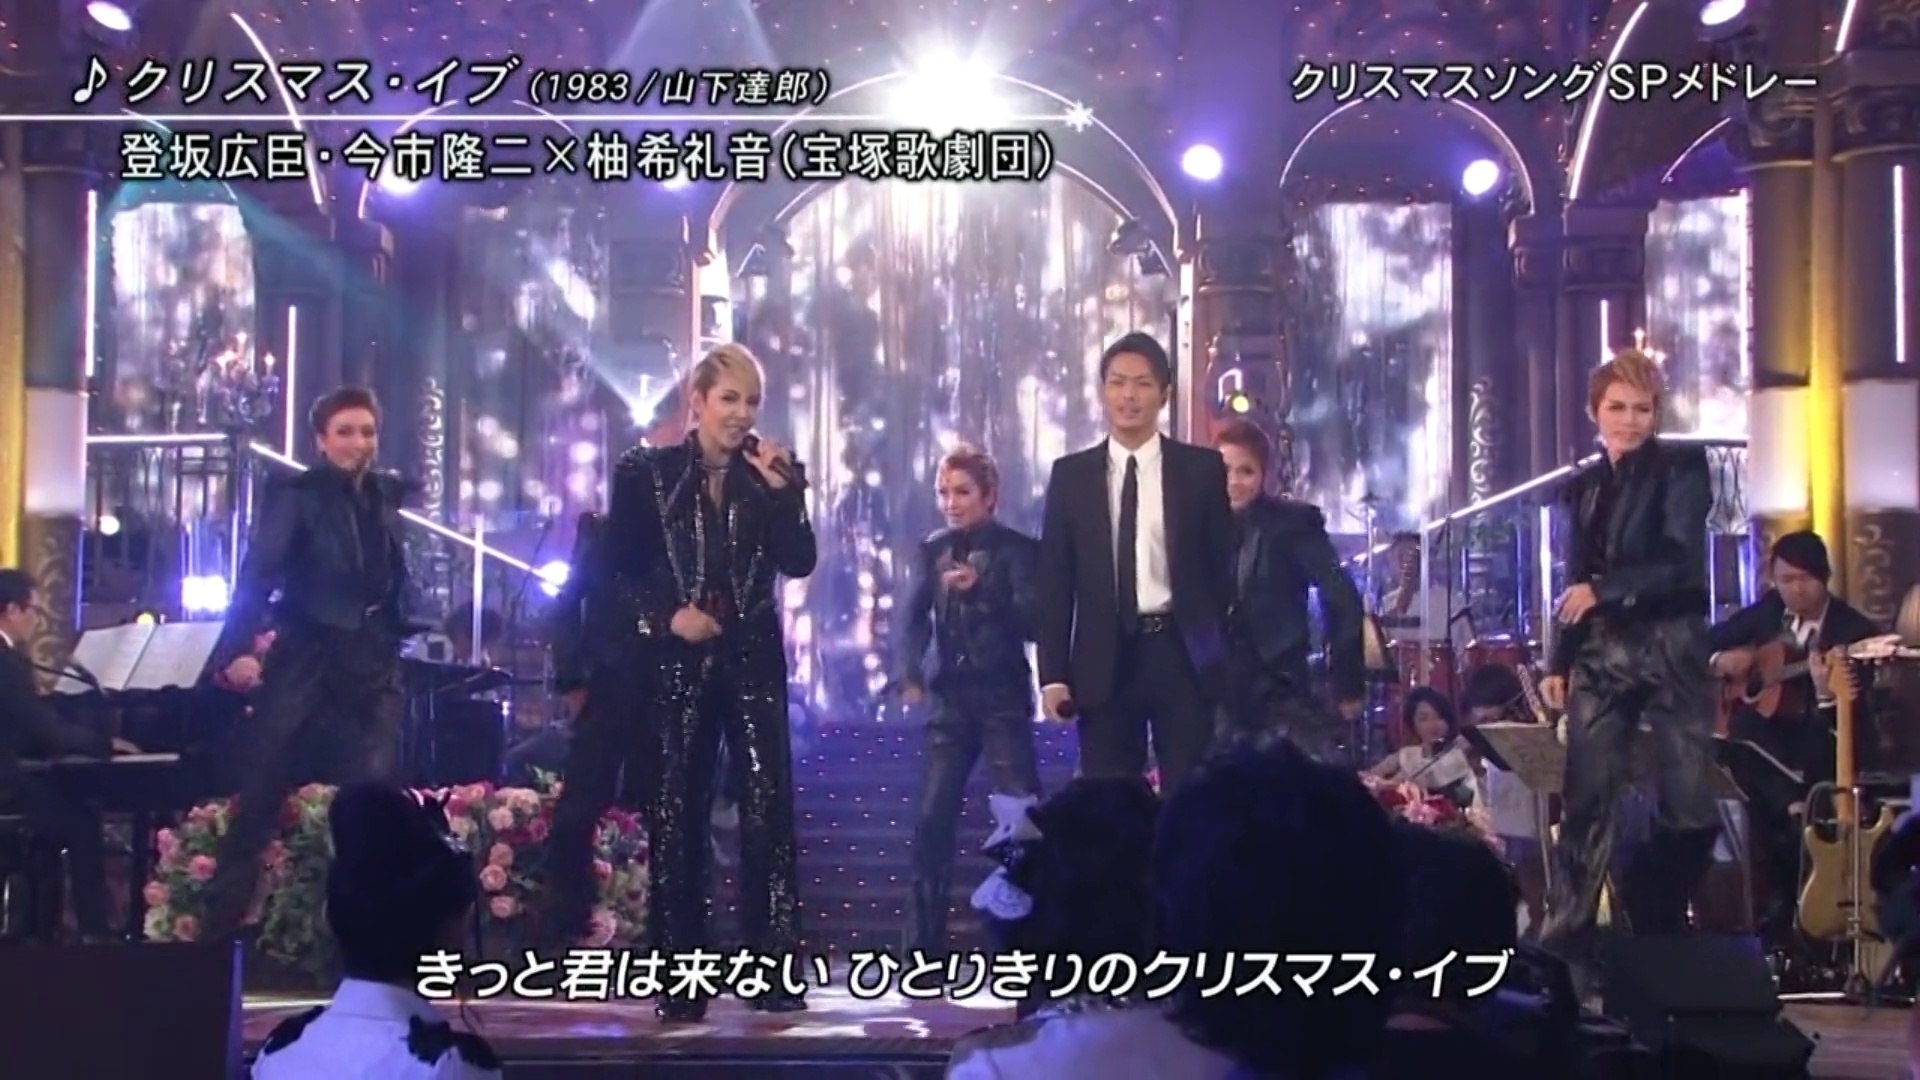 Fns歌謡祭14 Christmas Eve 登坂広臣 今市隆二 X 柚希礼音 Video Dailymotion